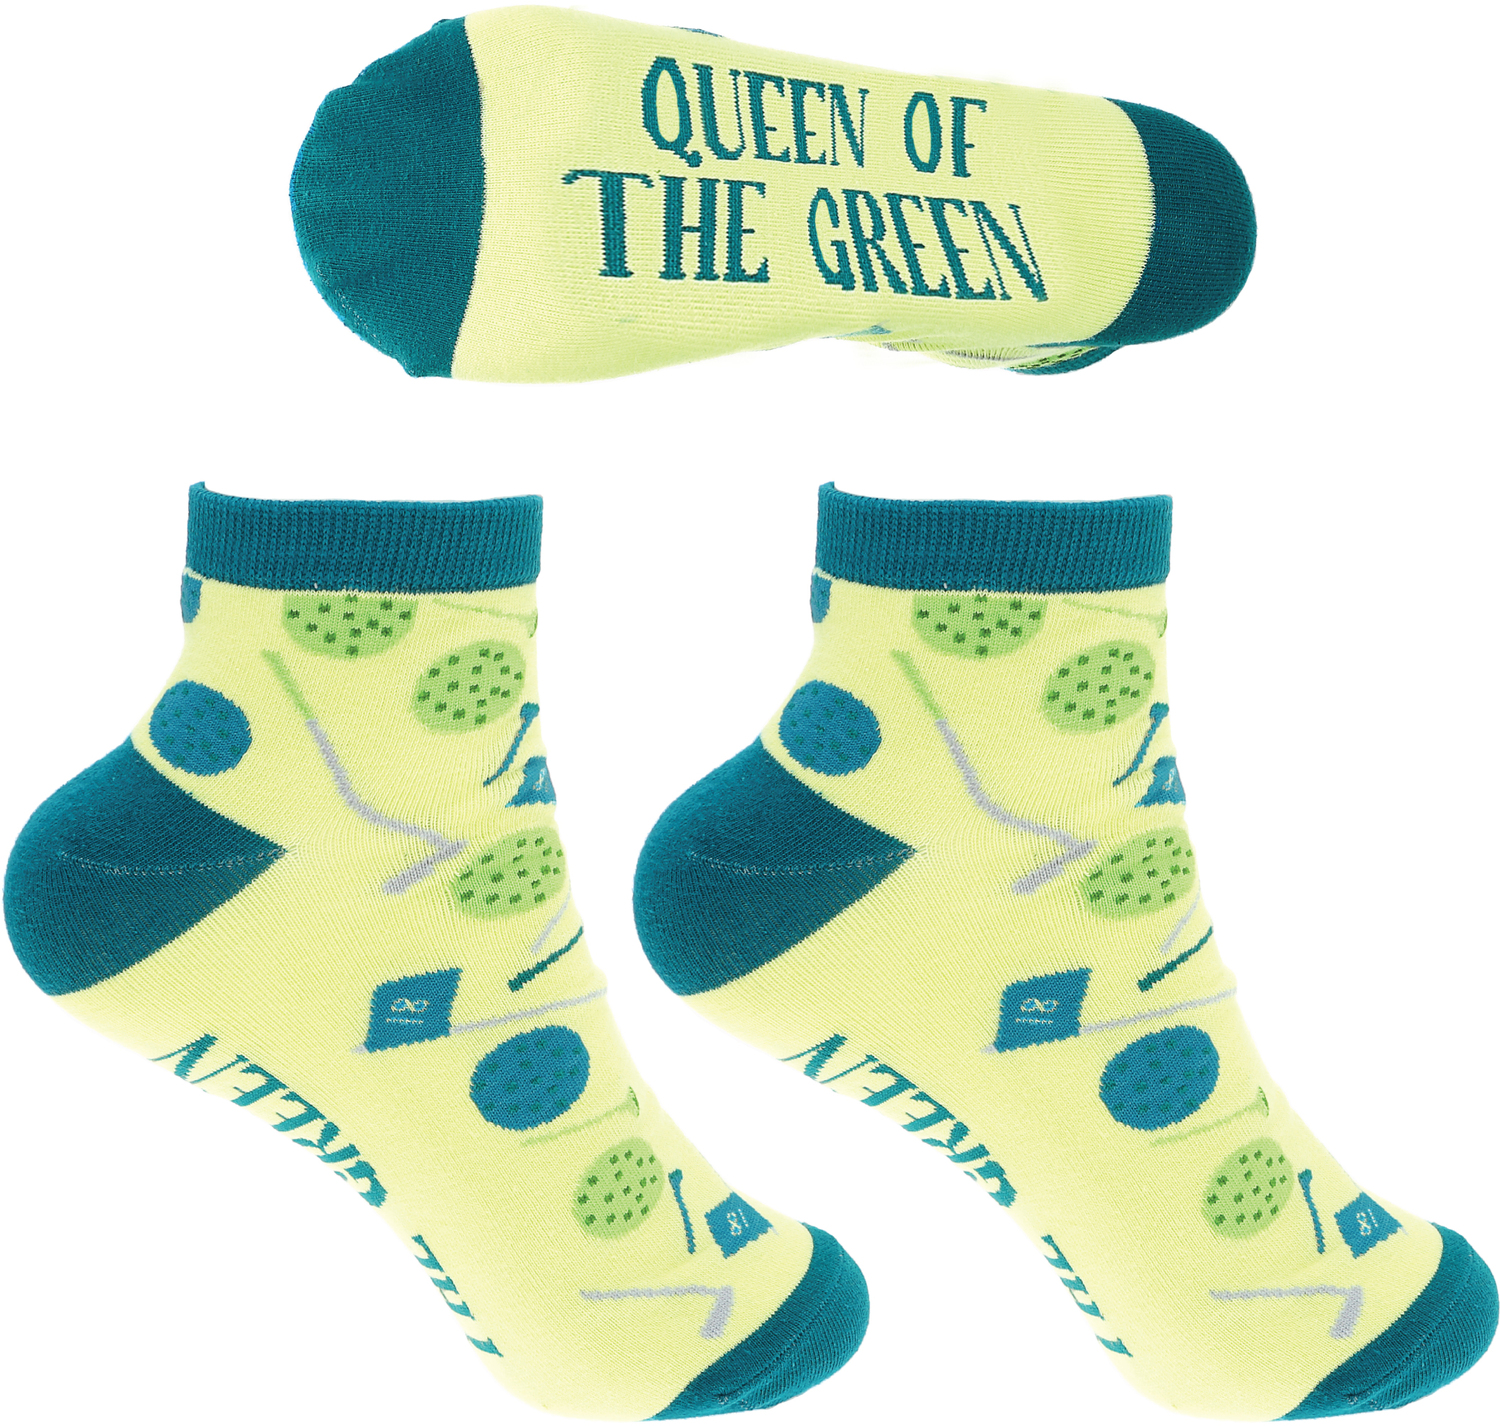 Queen of the Green by Queen of the Green - MHS - Queen of the Green - Women's Ankle Socks